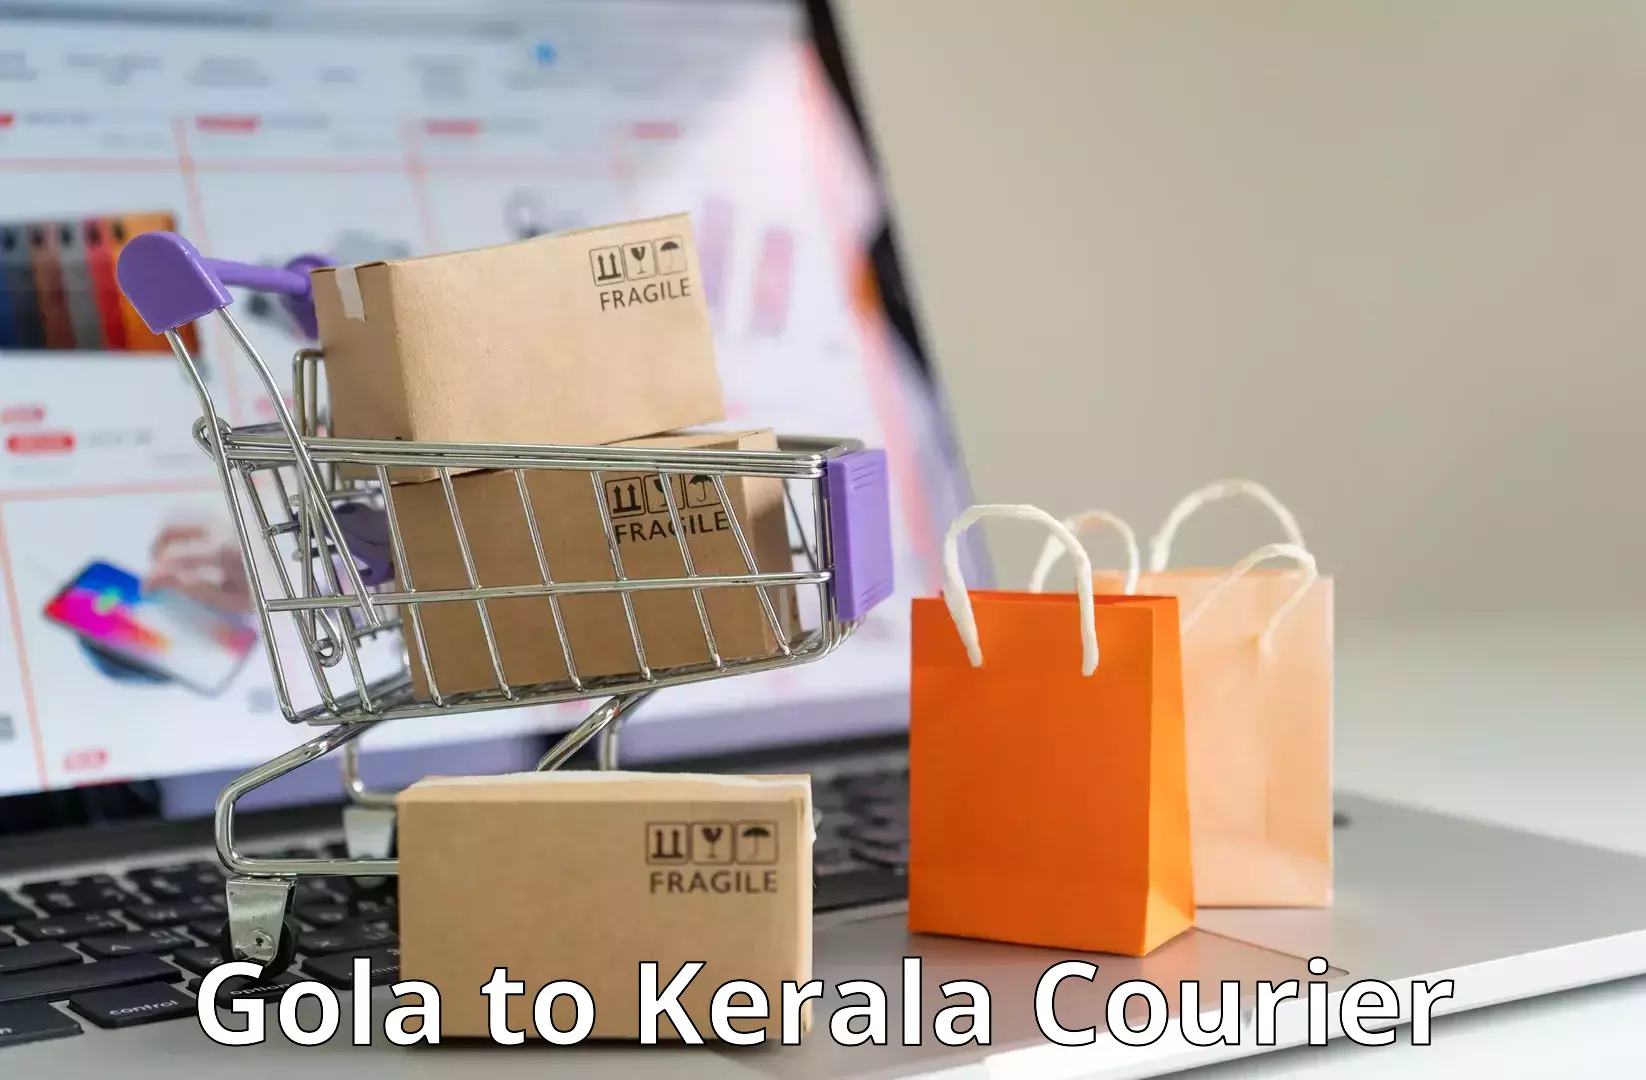 Same-day delivery options Gola to Kalpetta